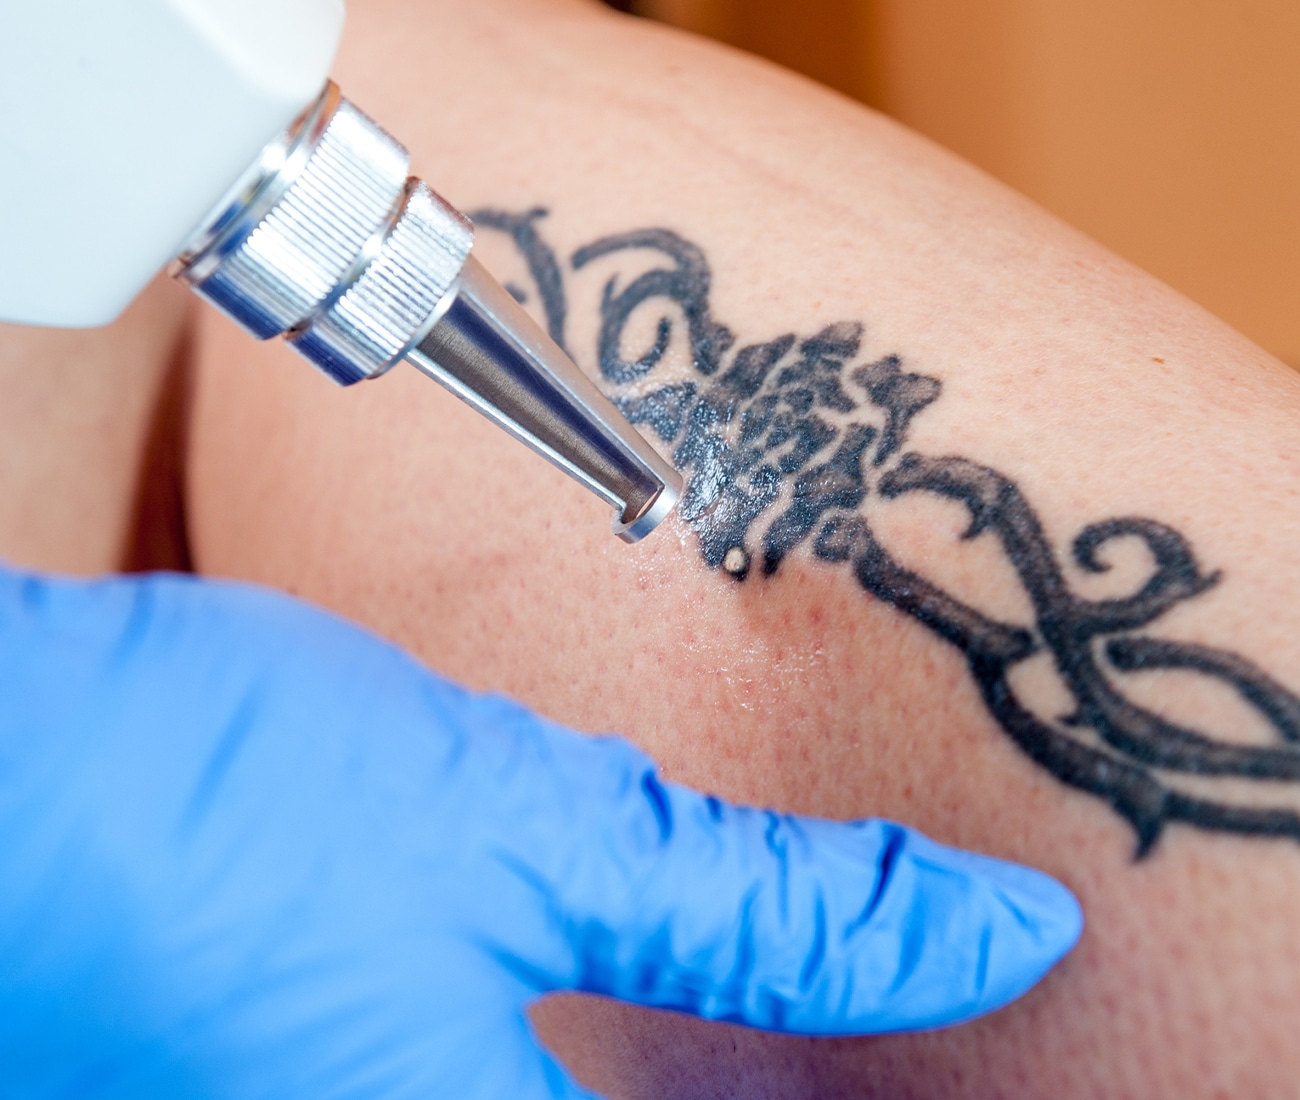 Patient Having Tattoo Removed